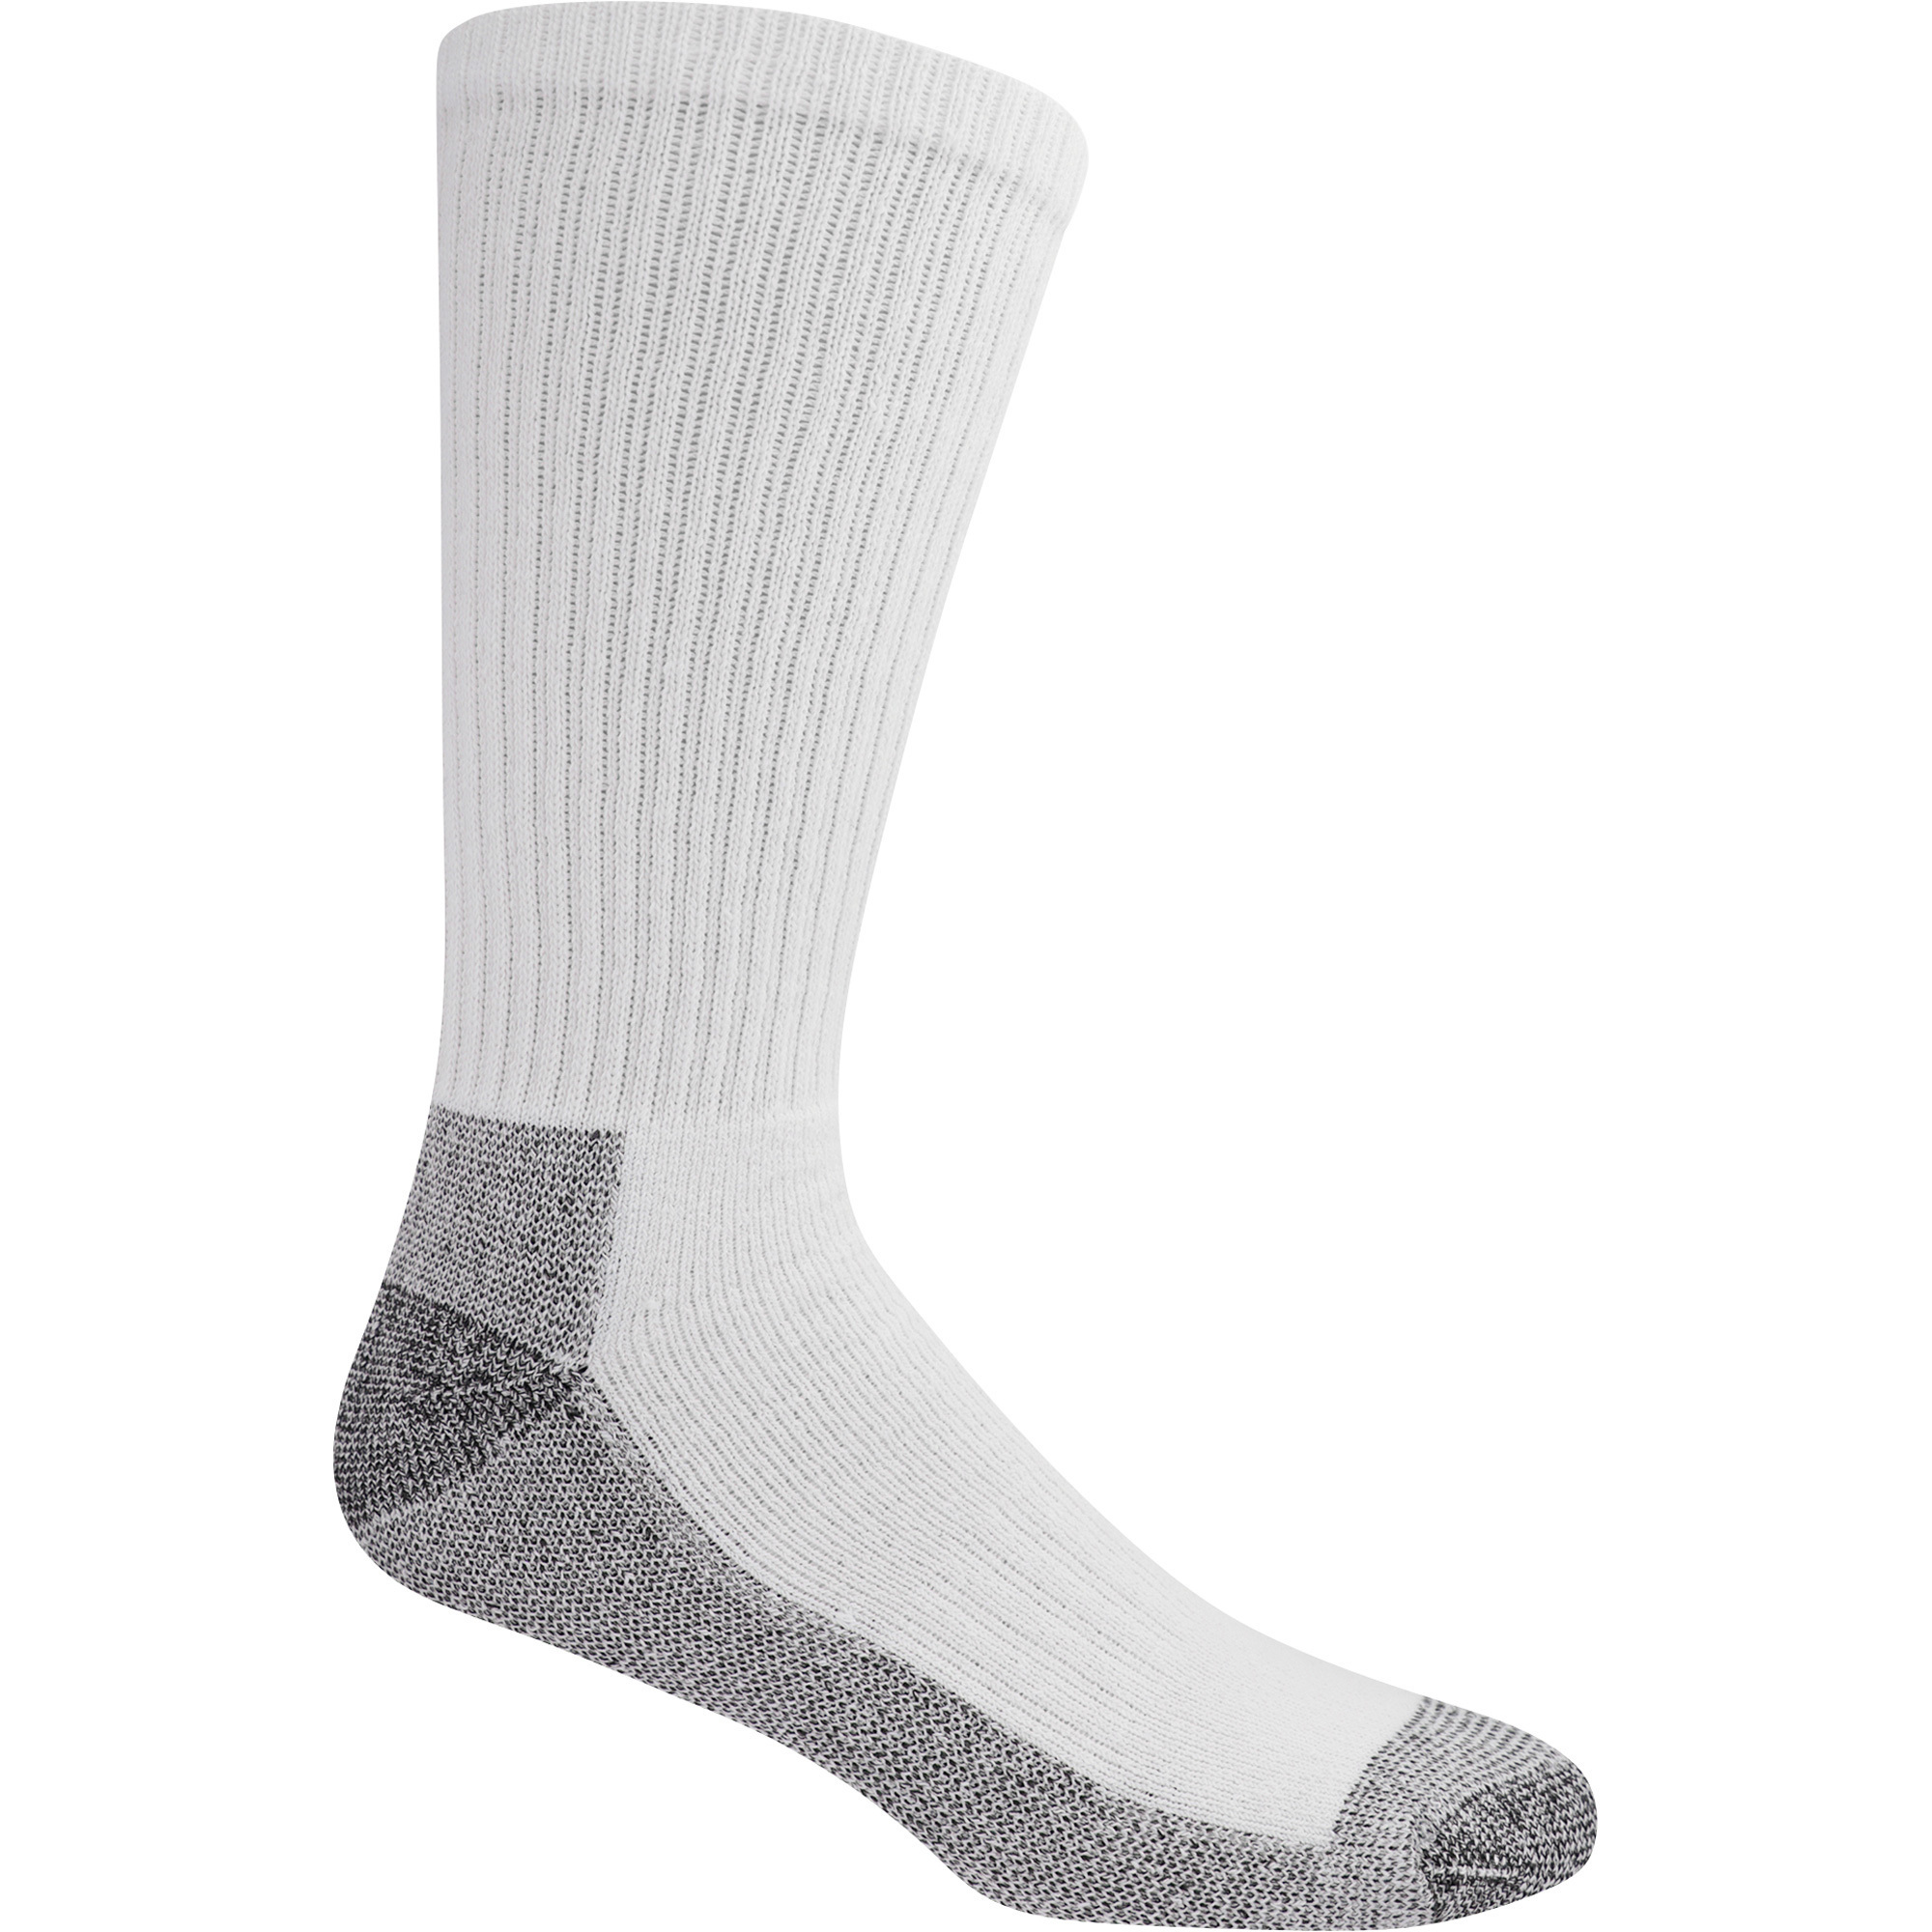 Fruit of the Loom All Season Poly/Cotton Crew Socks, 6 Pairs, White, Large, Model FRM10578C6C2001 WHITE